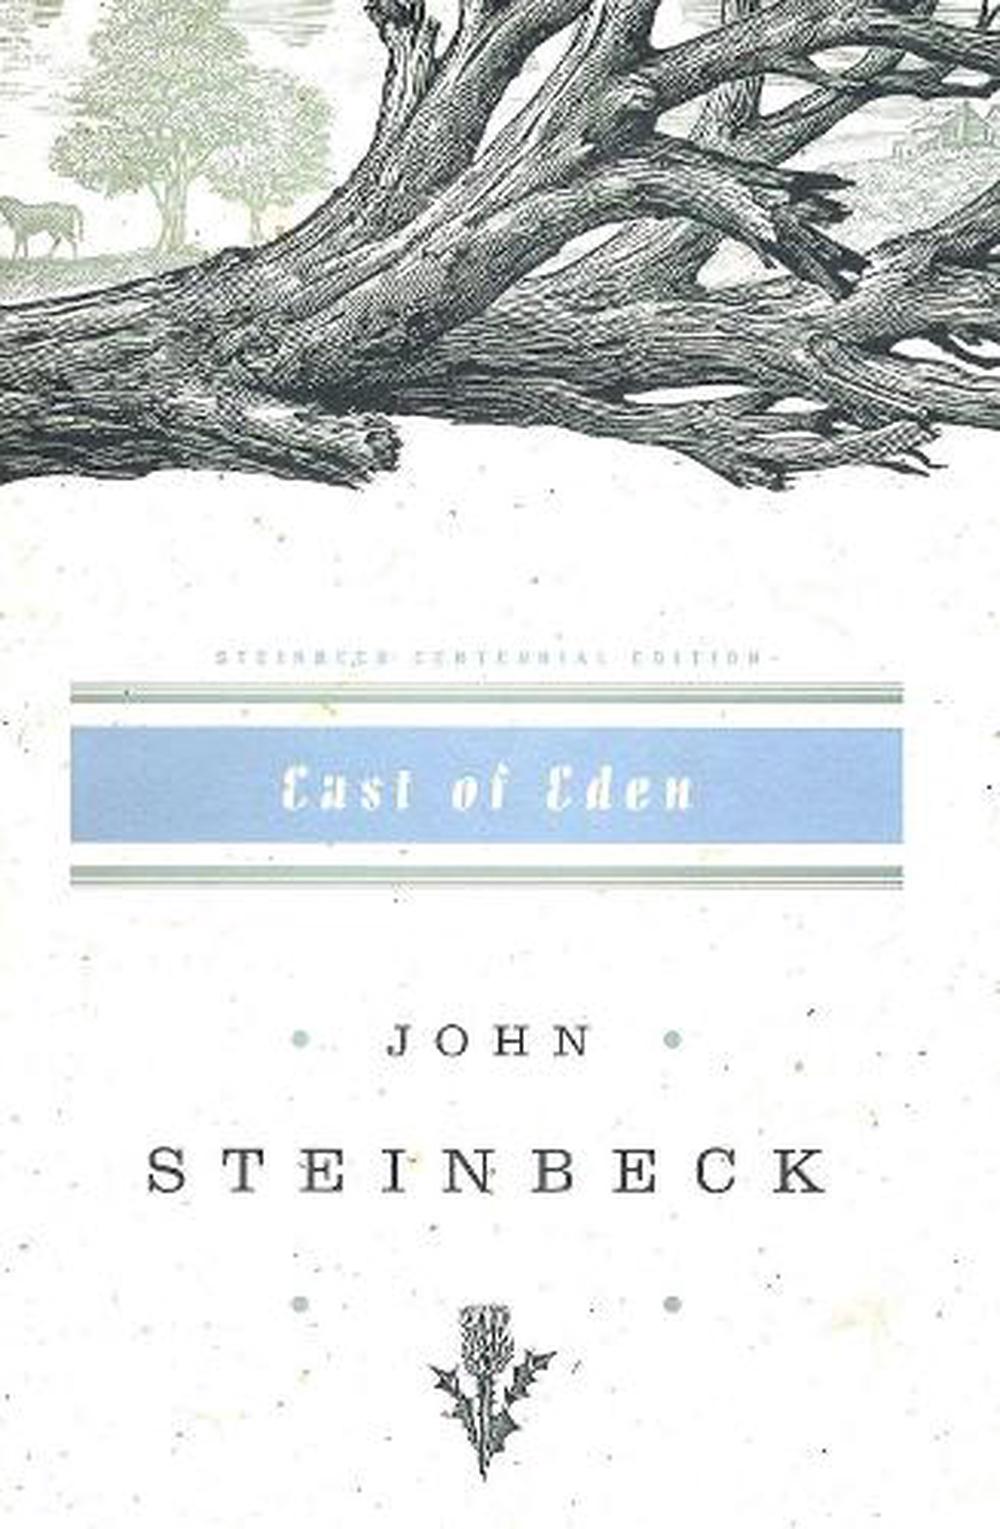 9780142004234　Eden　John　The　Nile　online　by　Steinbeck,　Buy　Paperback,　at　East　of